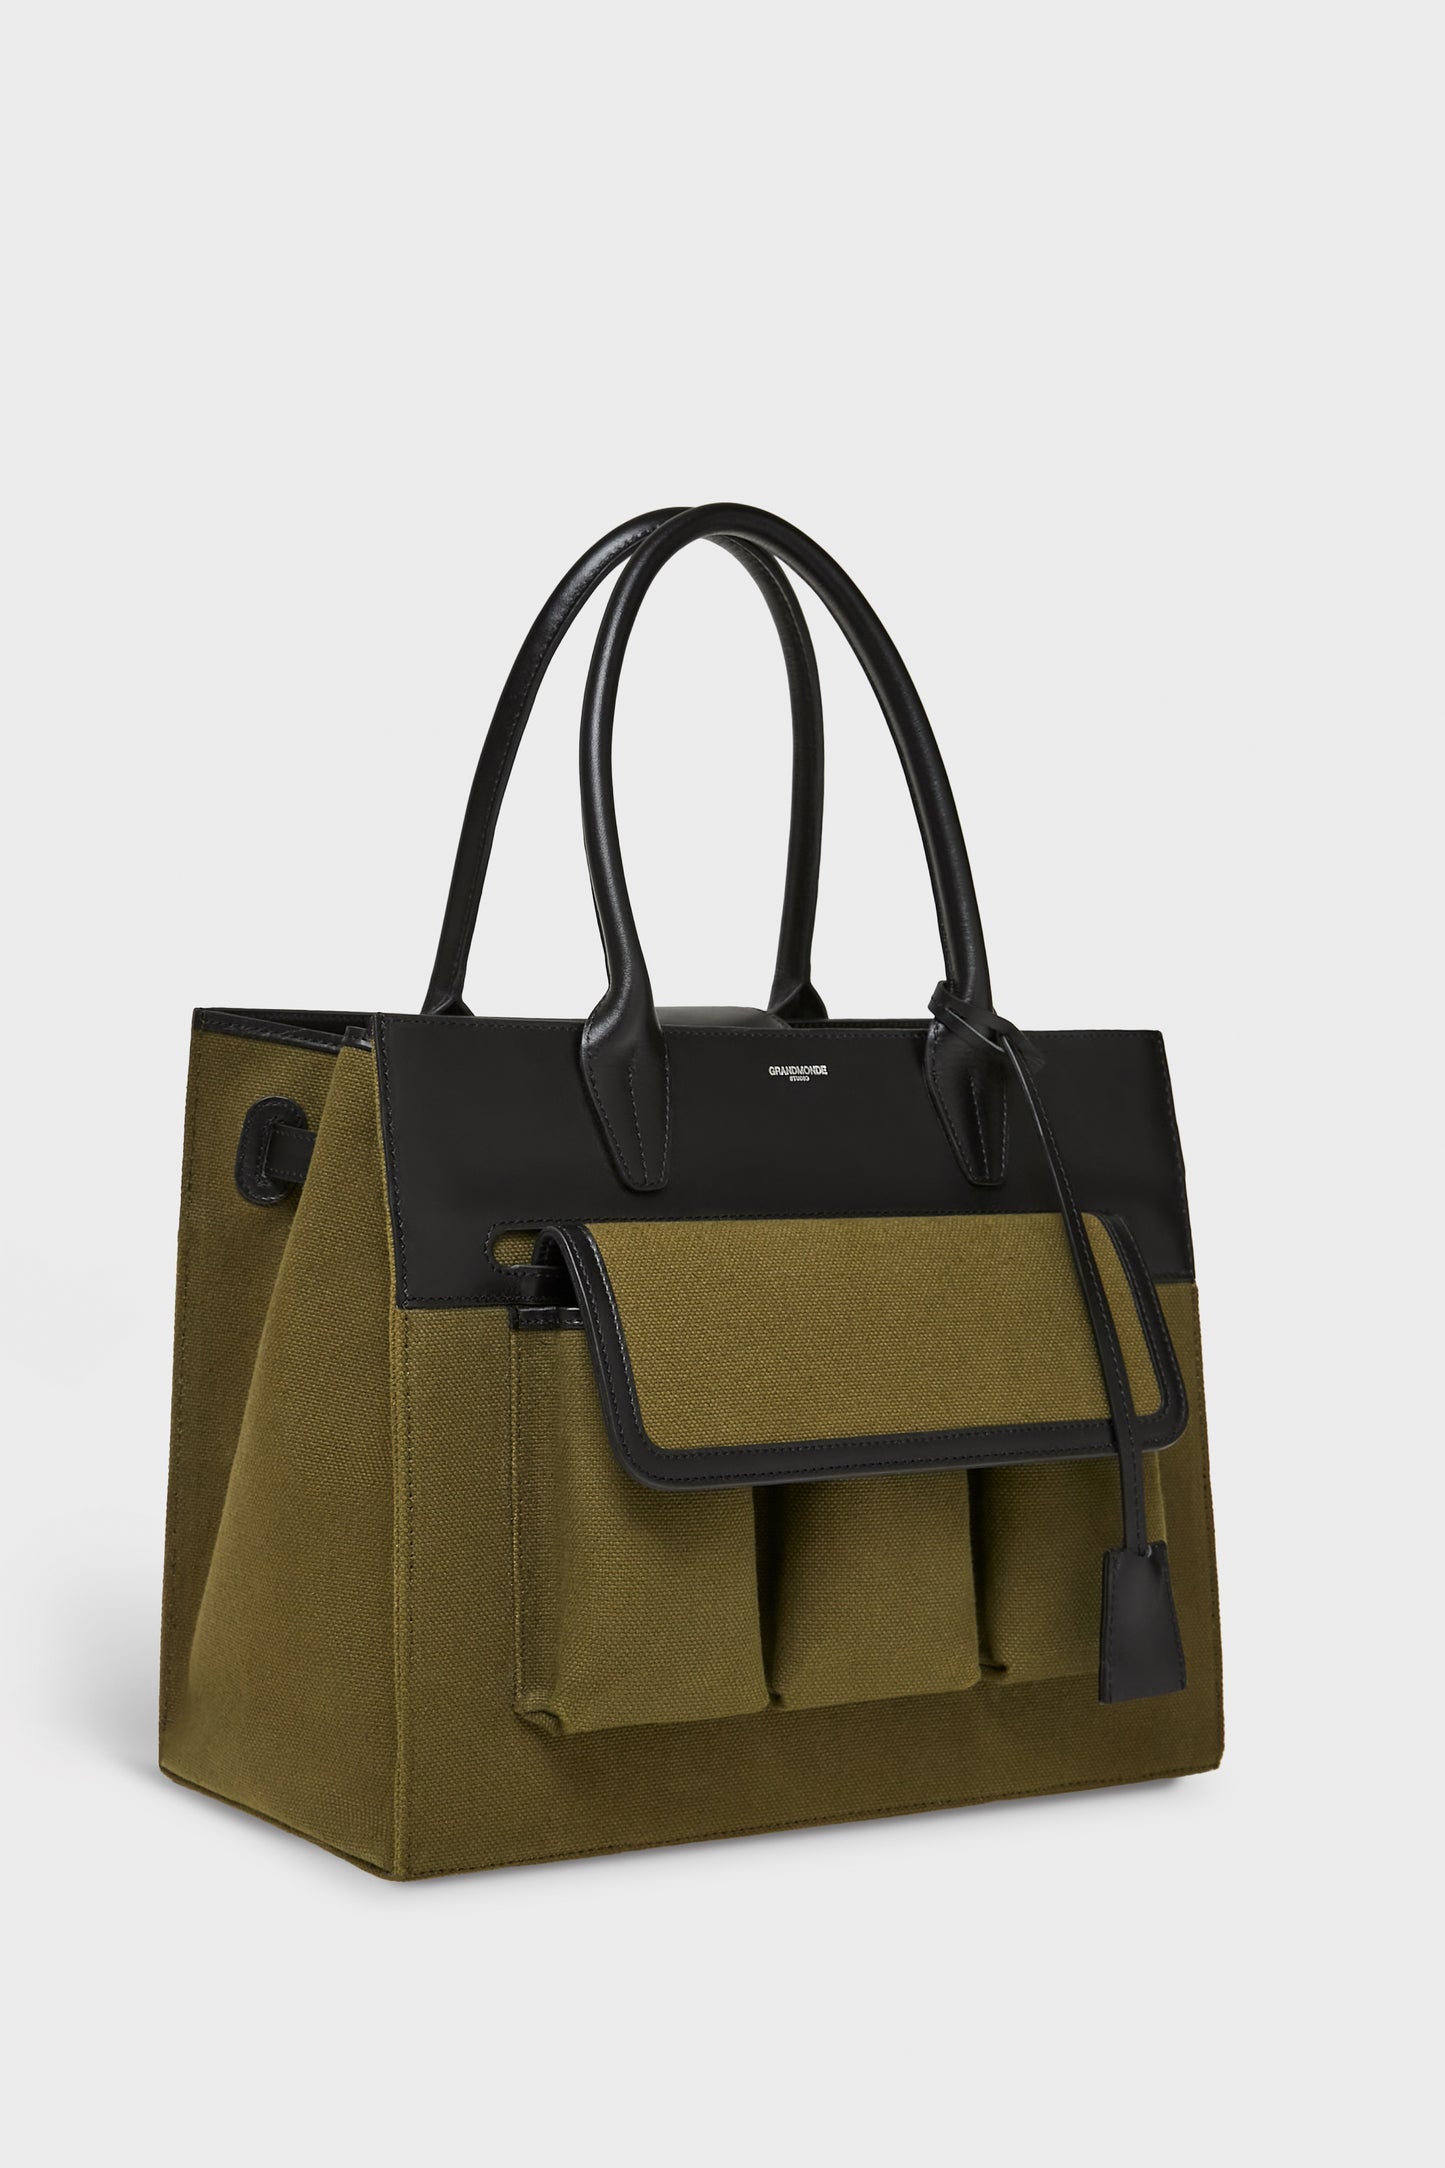 OLIVE WATSON TOTE BAG IN CANVAS AND SMOOTH LEATHER